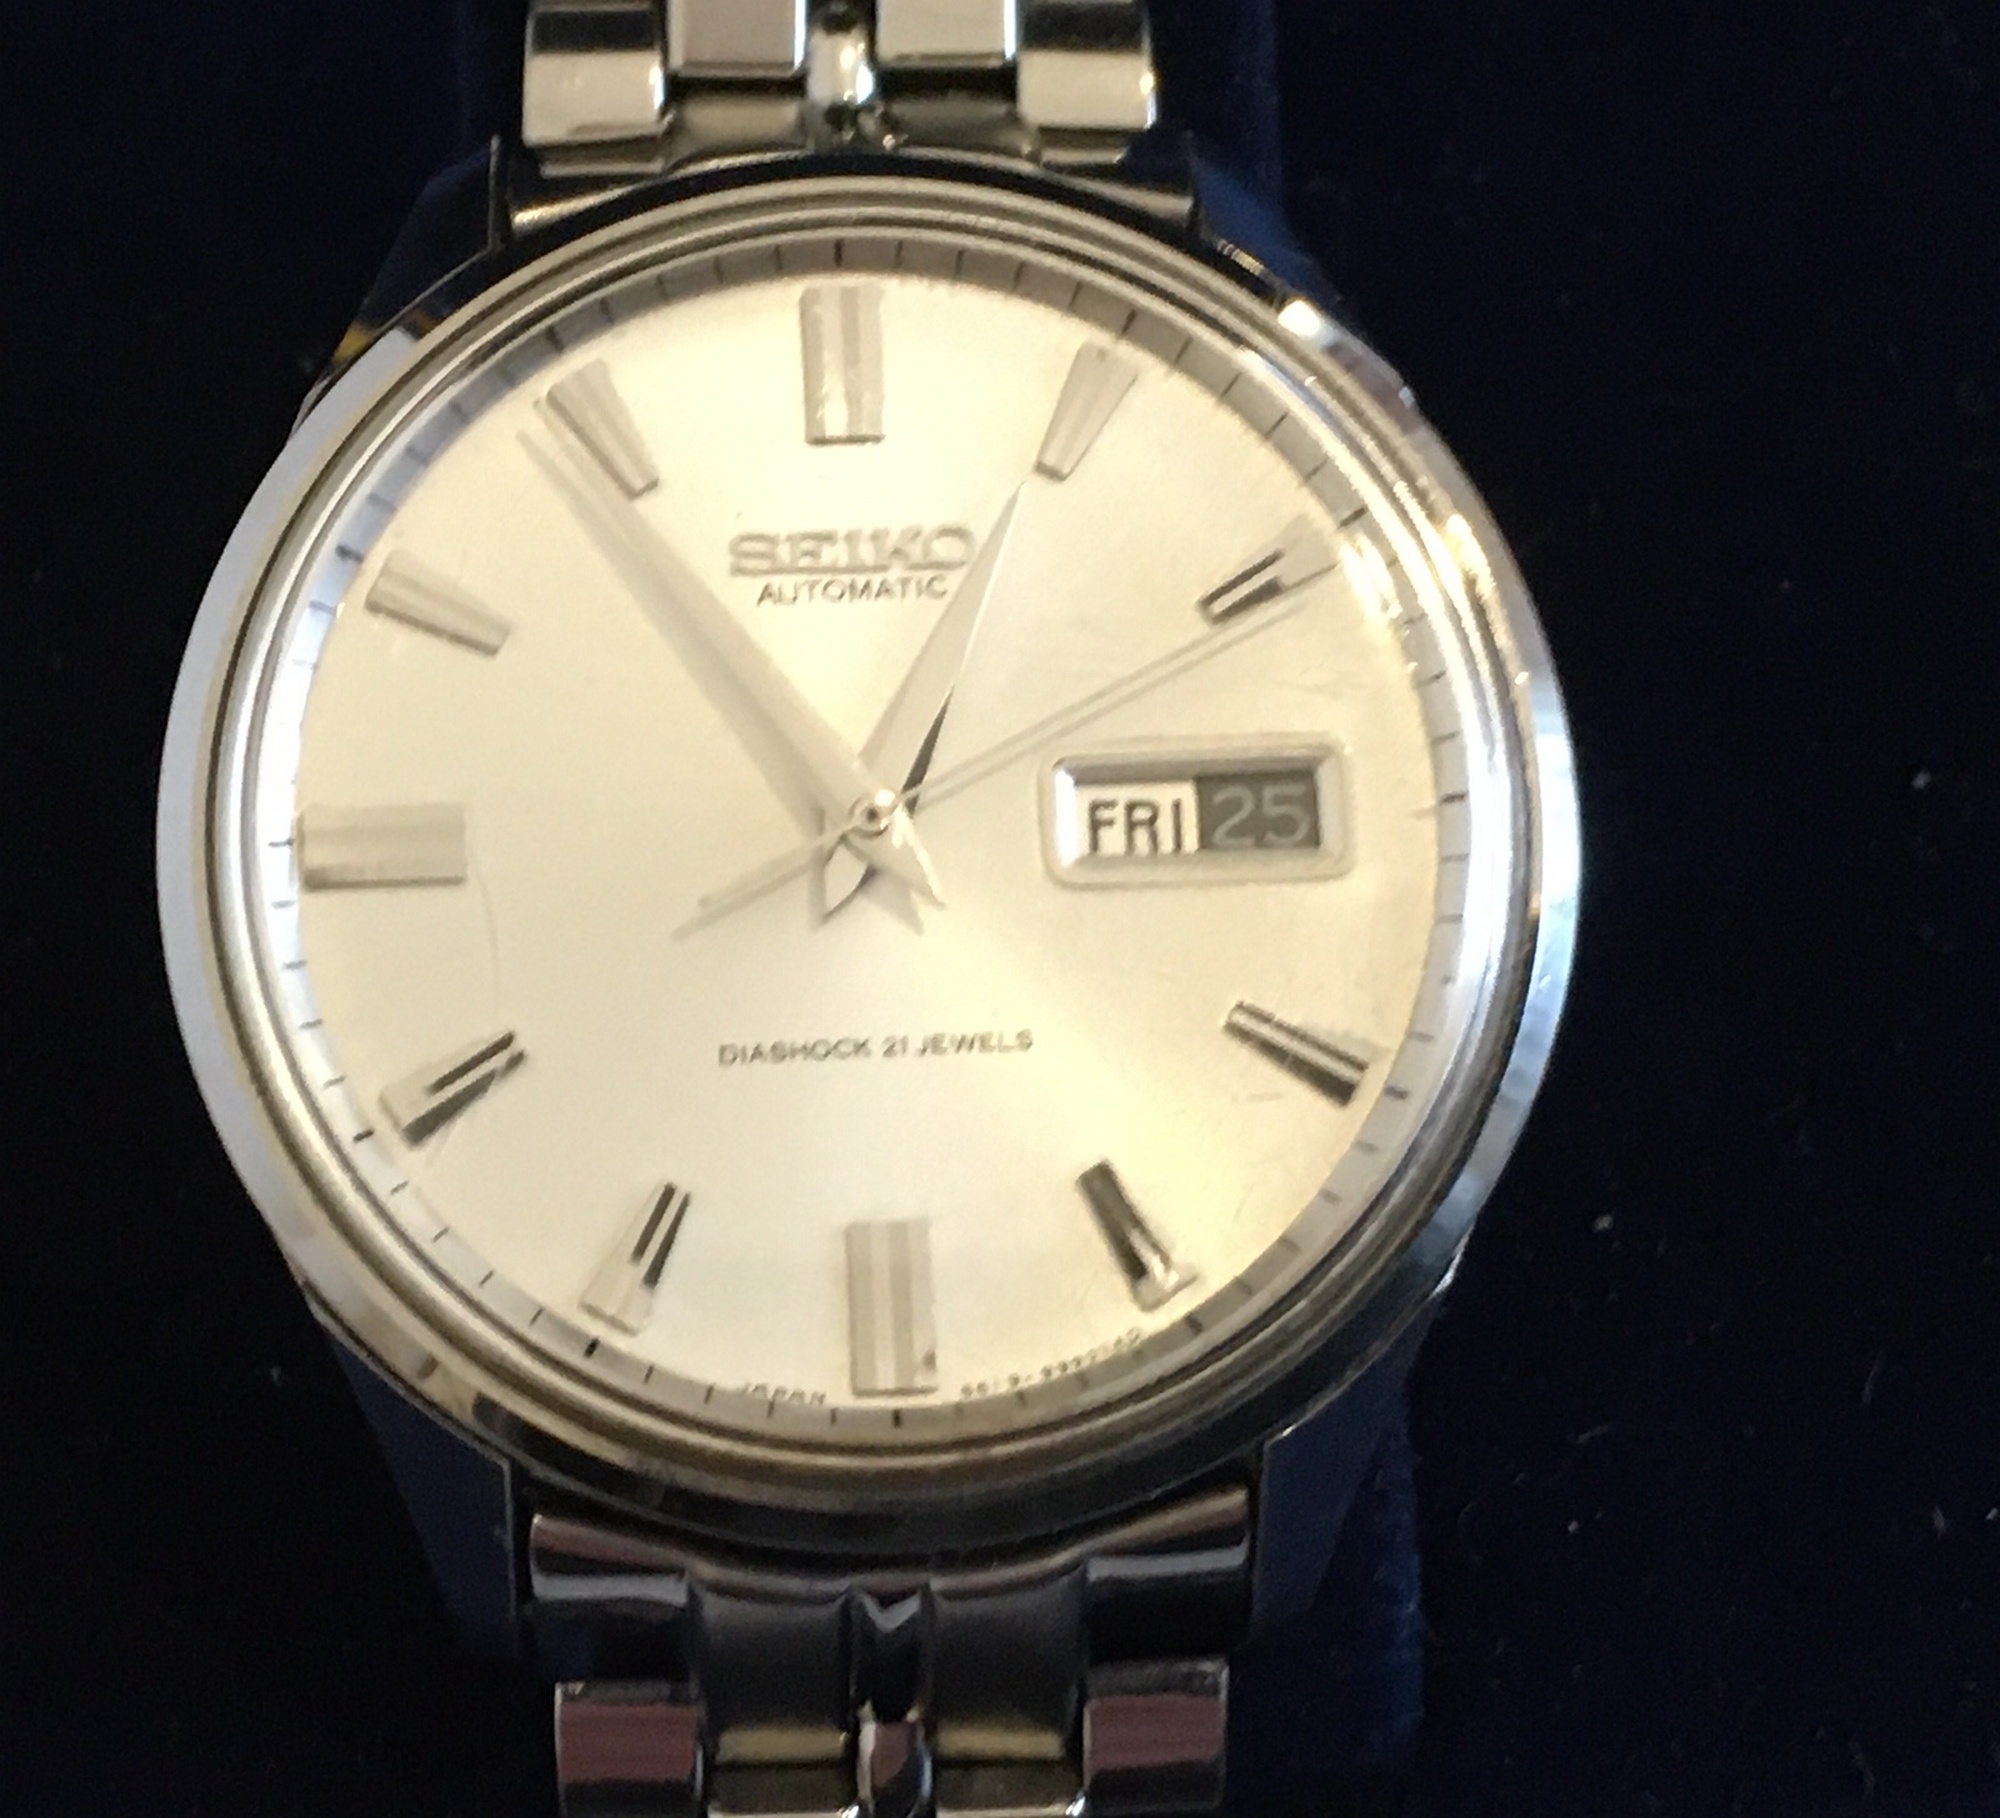 Vintage Boxed Seiko Automatic Diashock 21 Jewels - working order.The ...